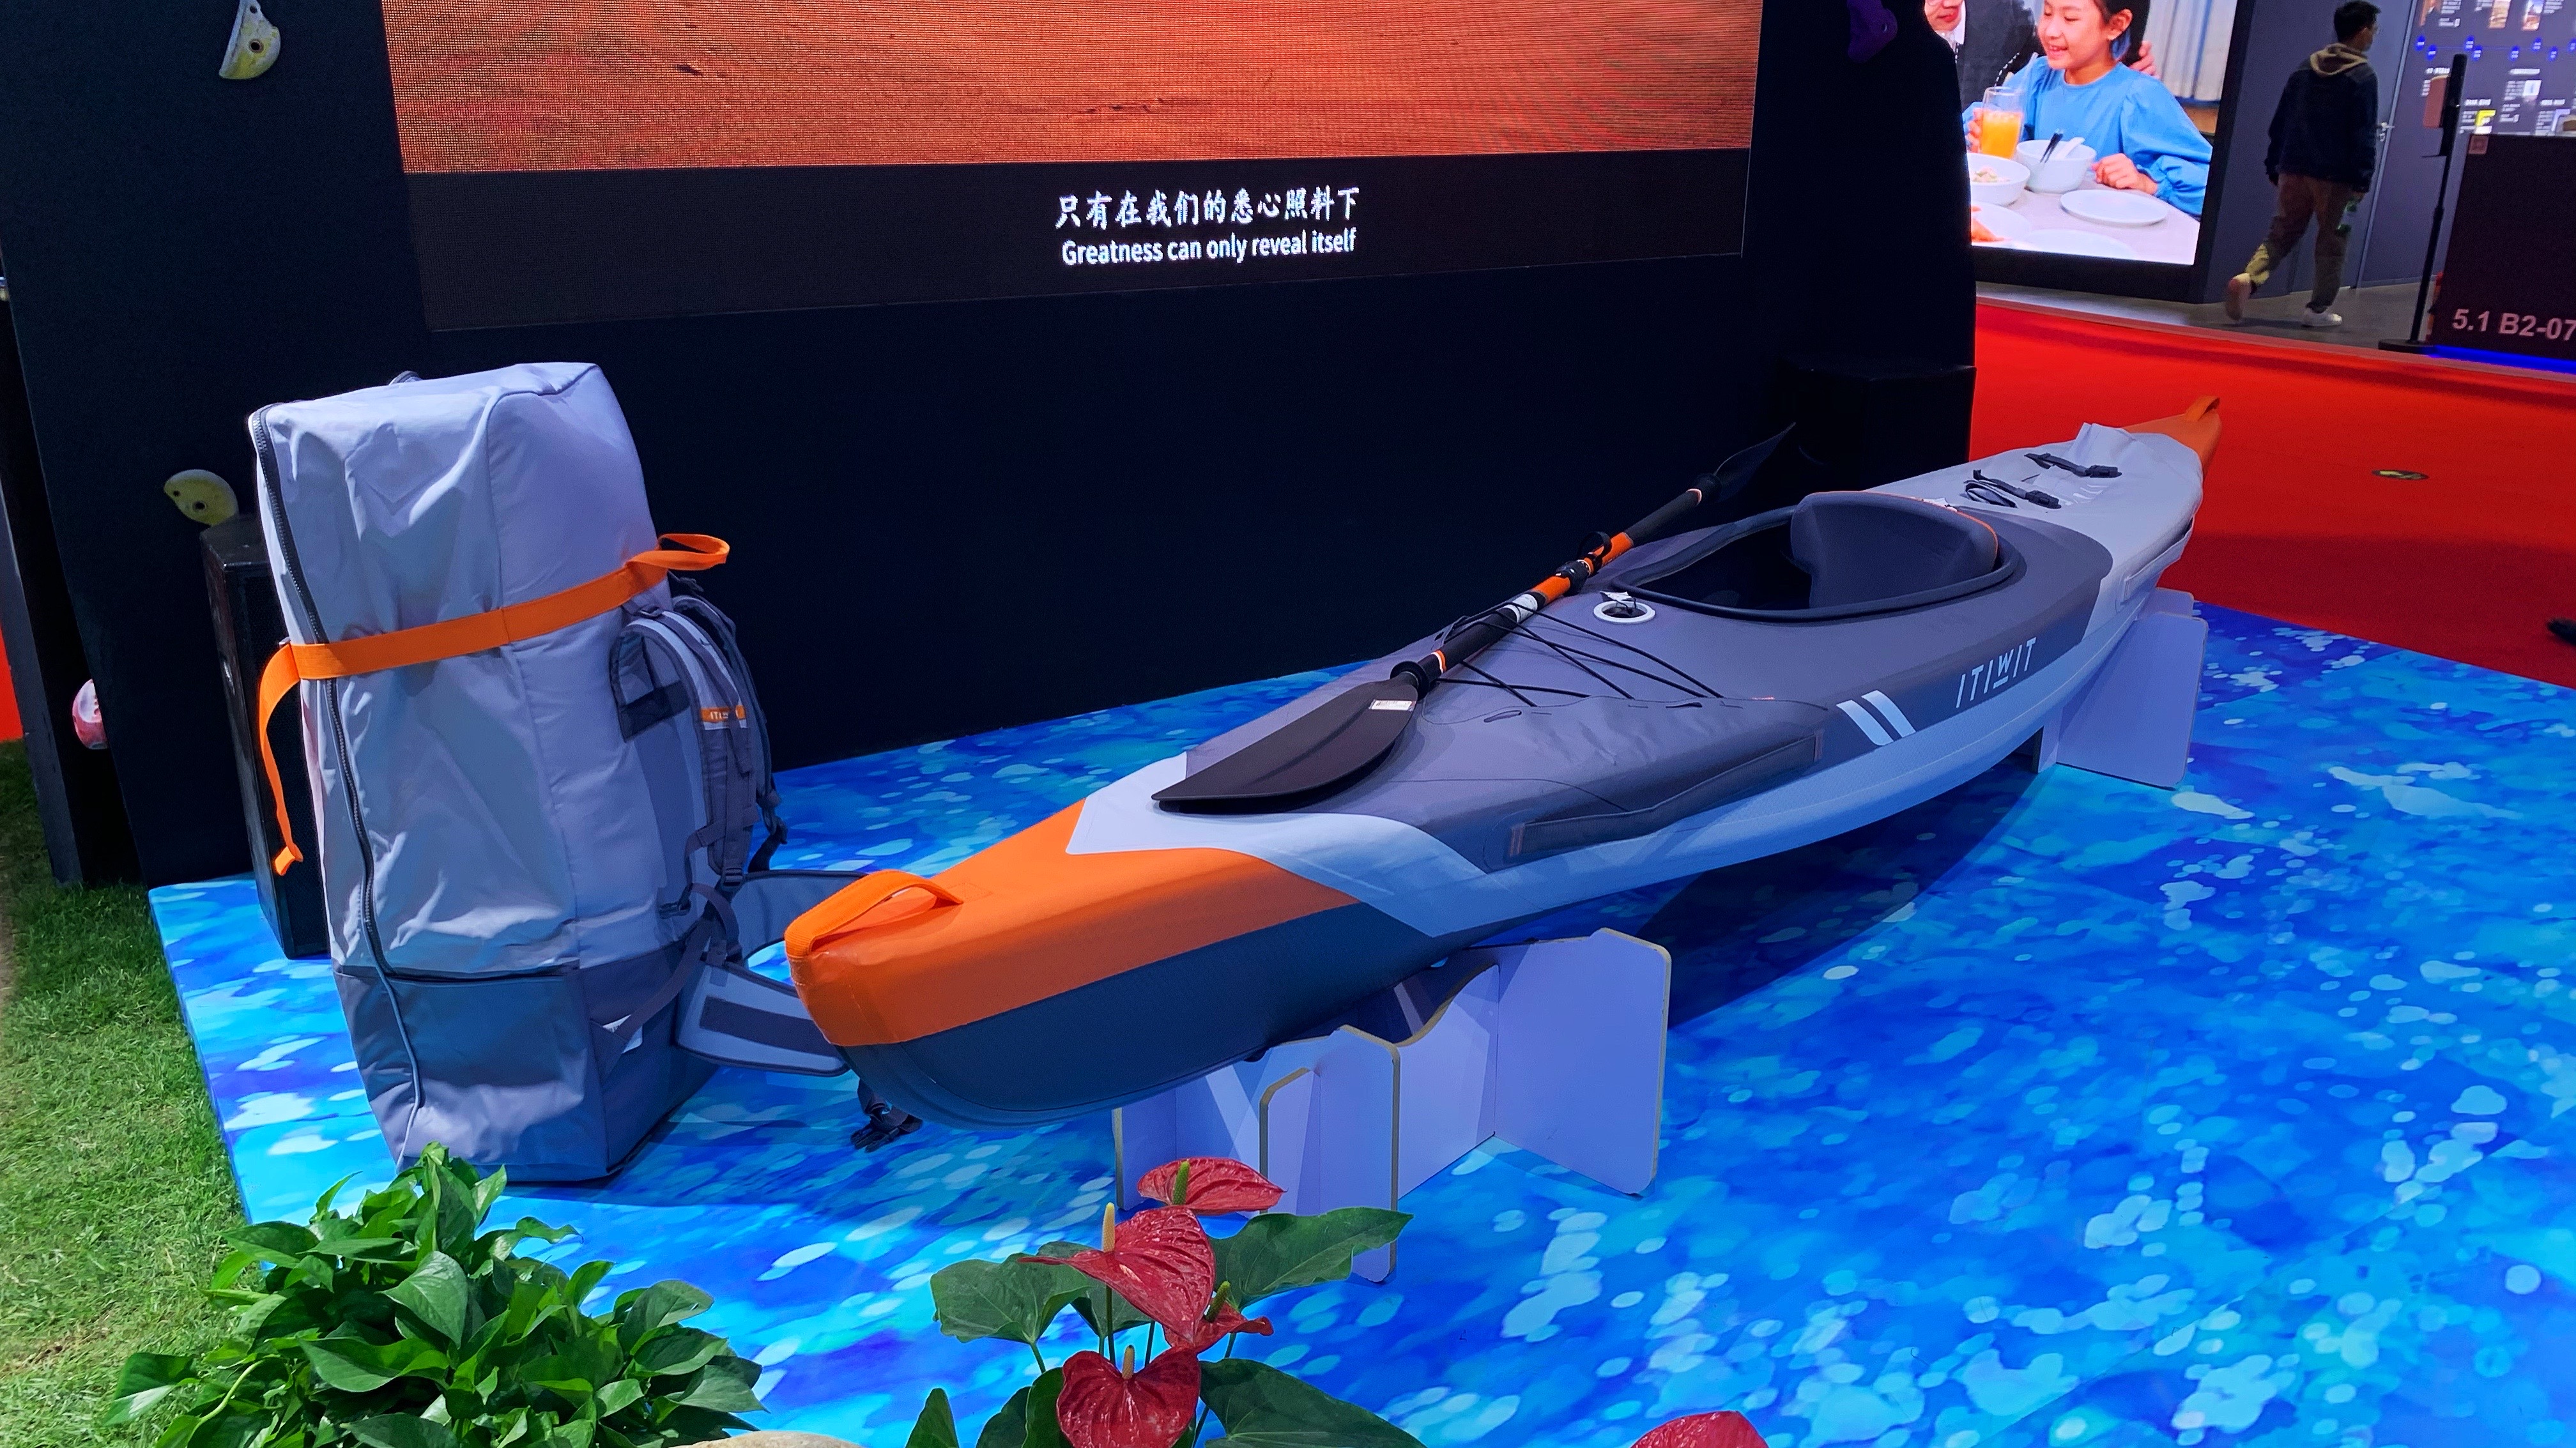 Pack a boat on your back: displays collapsible kayak - CGTN